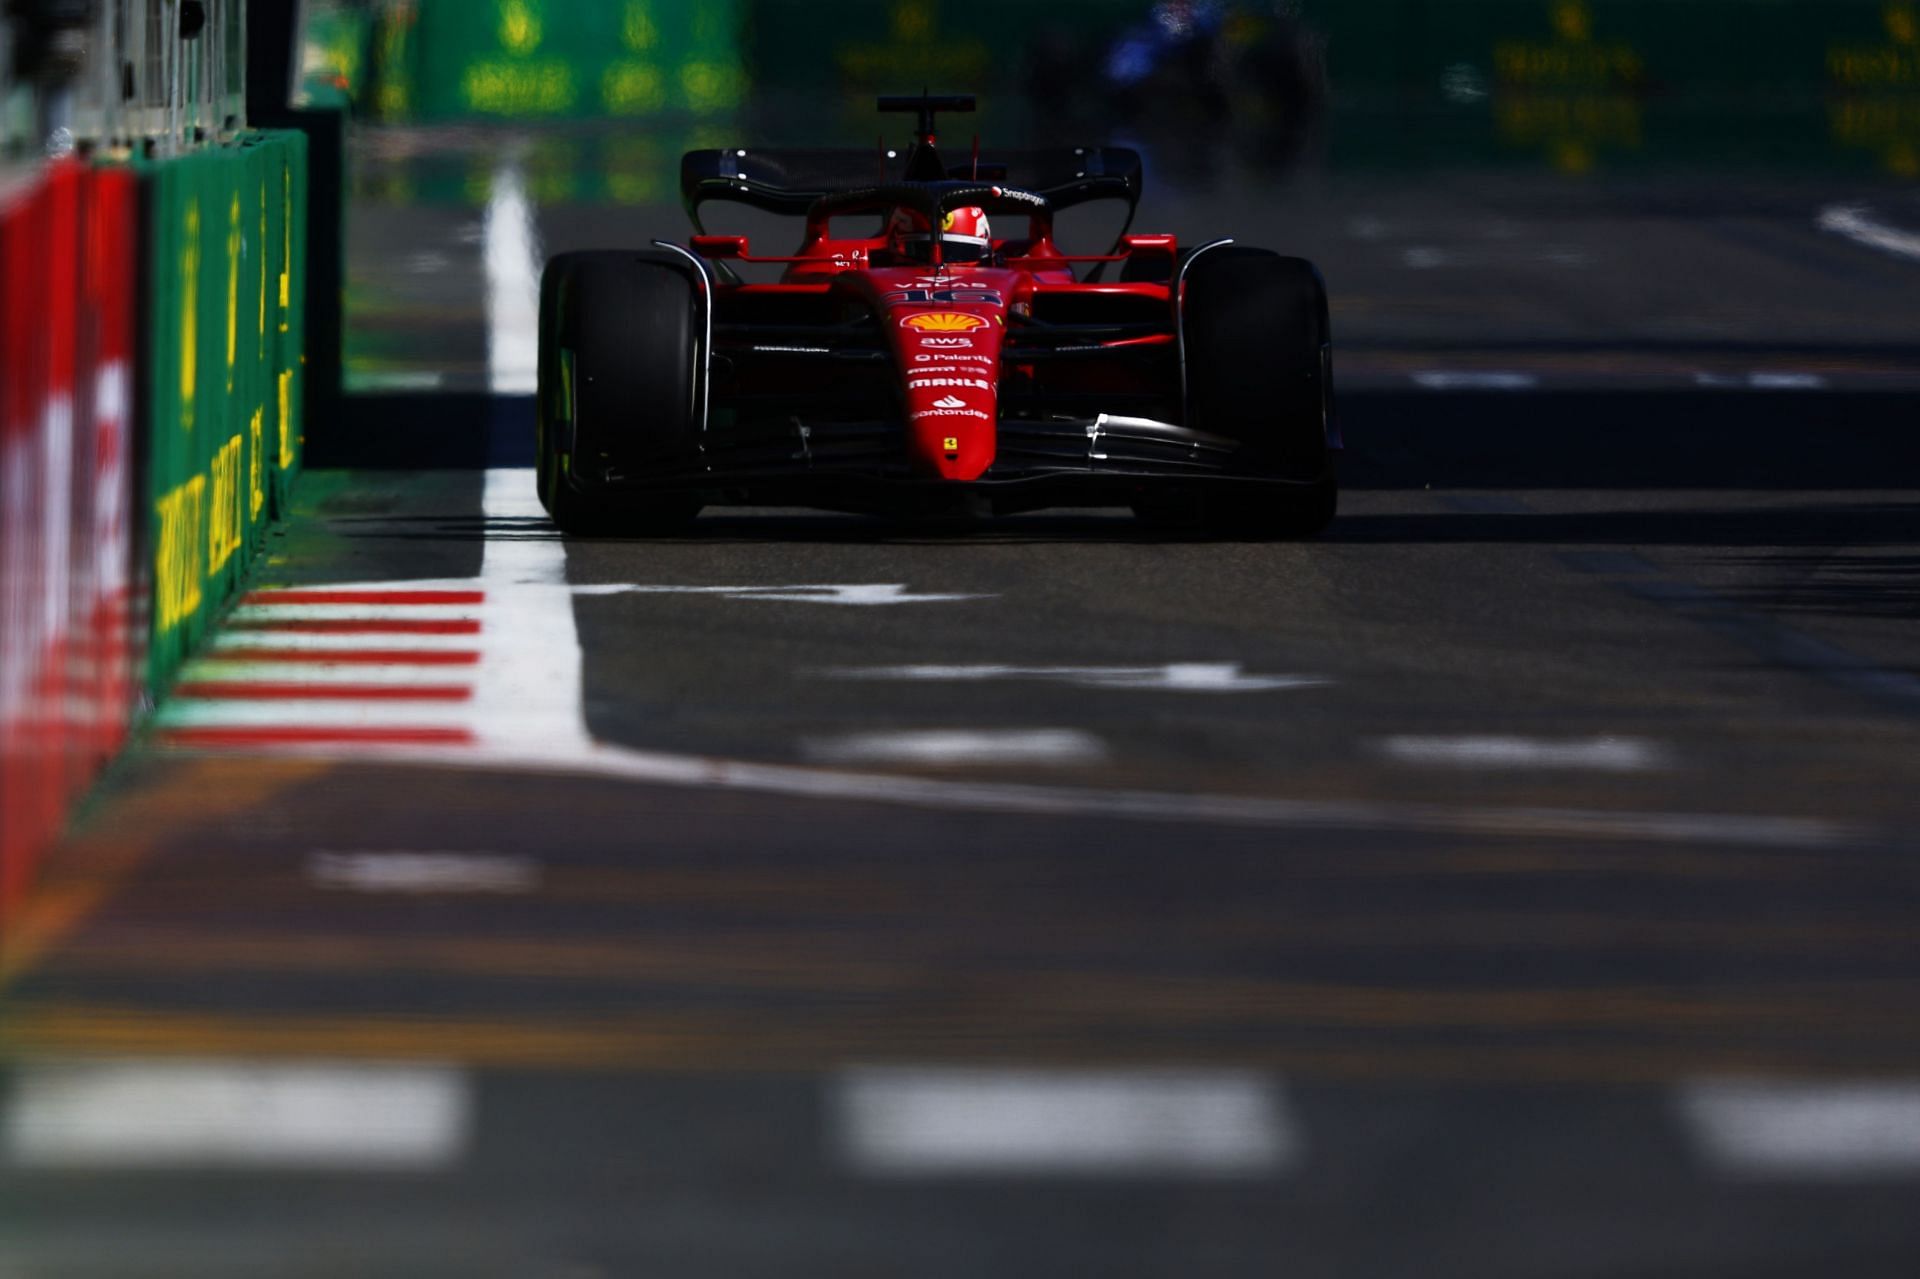 How Ferrari's traumatic decline does not signal the end of its title hopes